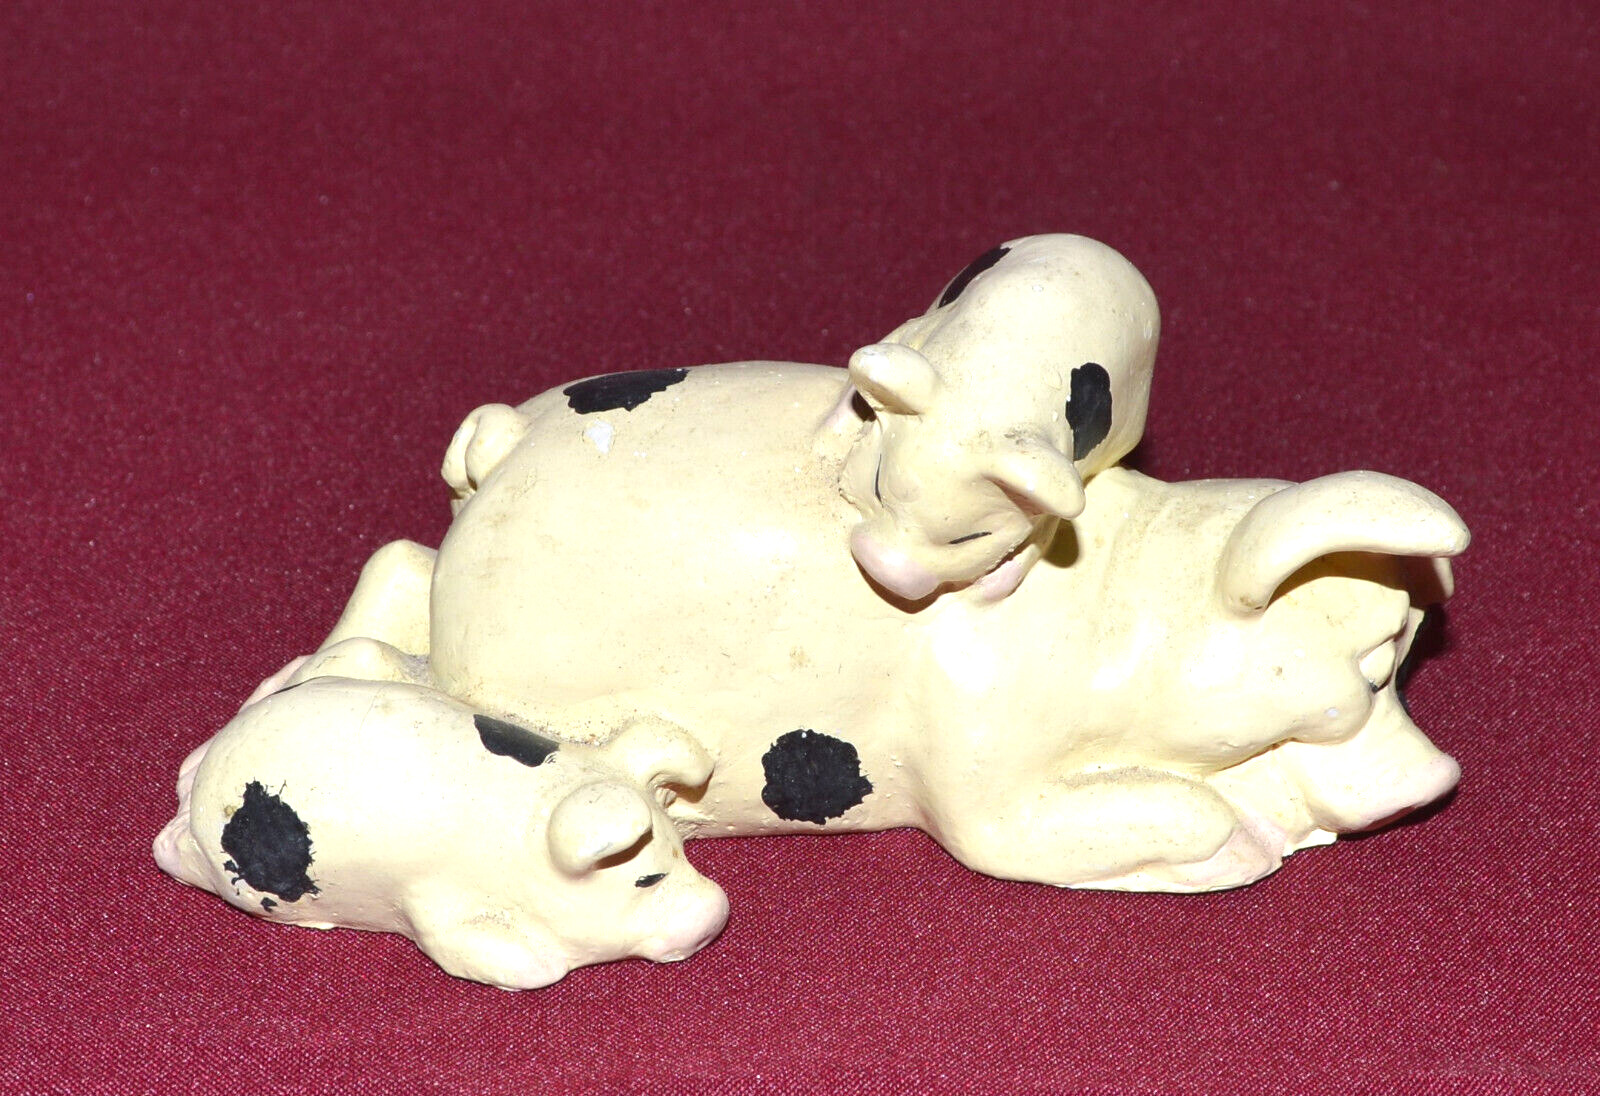 Ceramic Sleeping Black and White Mama Pig with Piglets